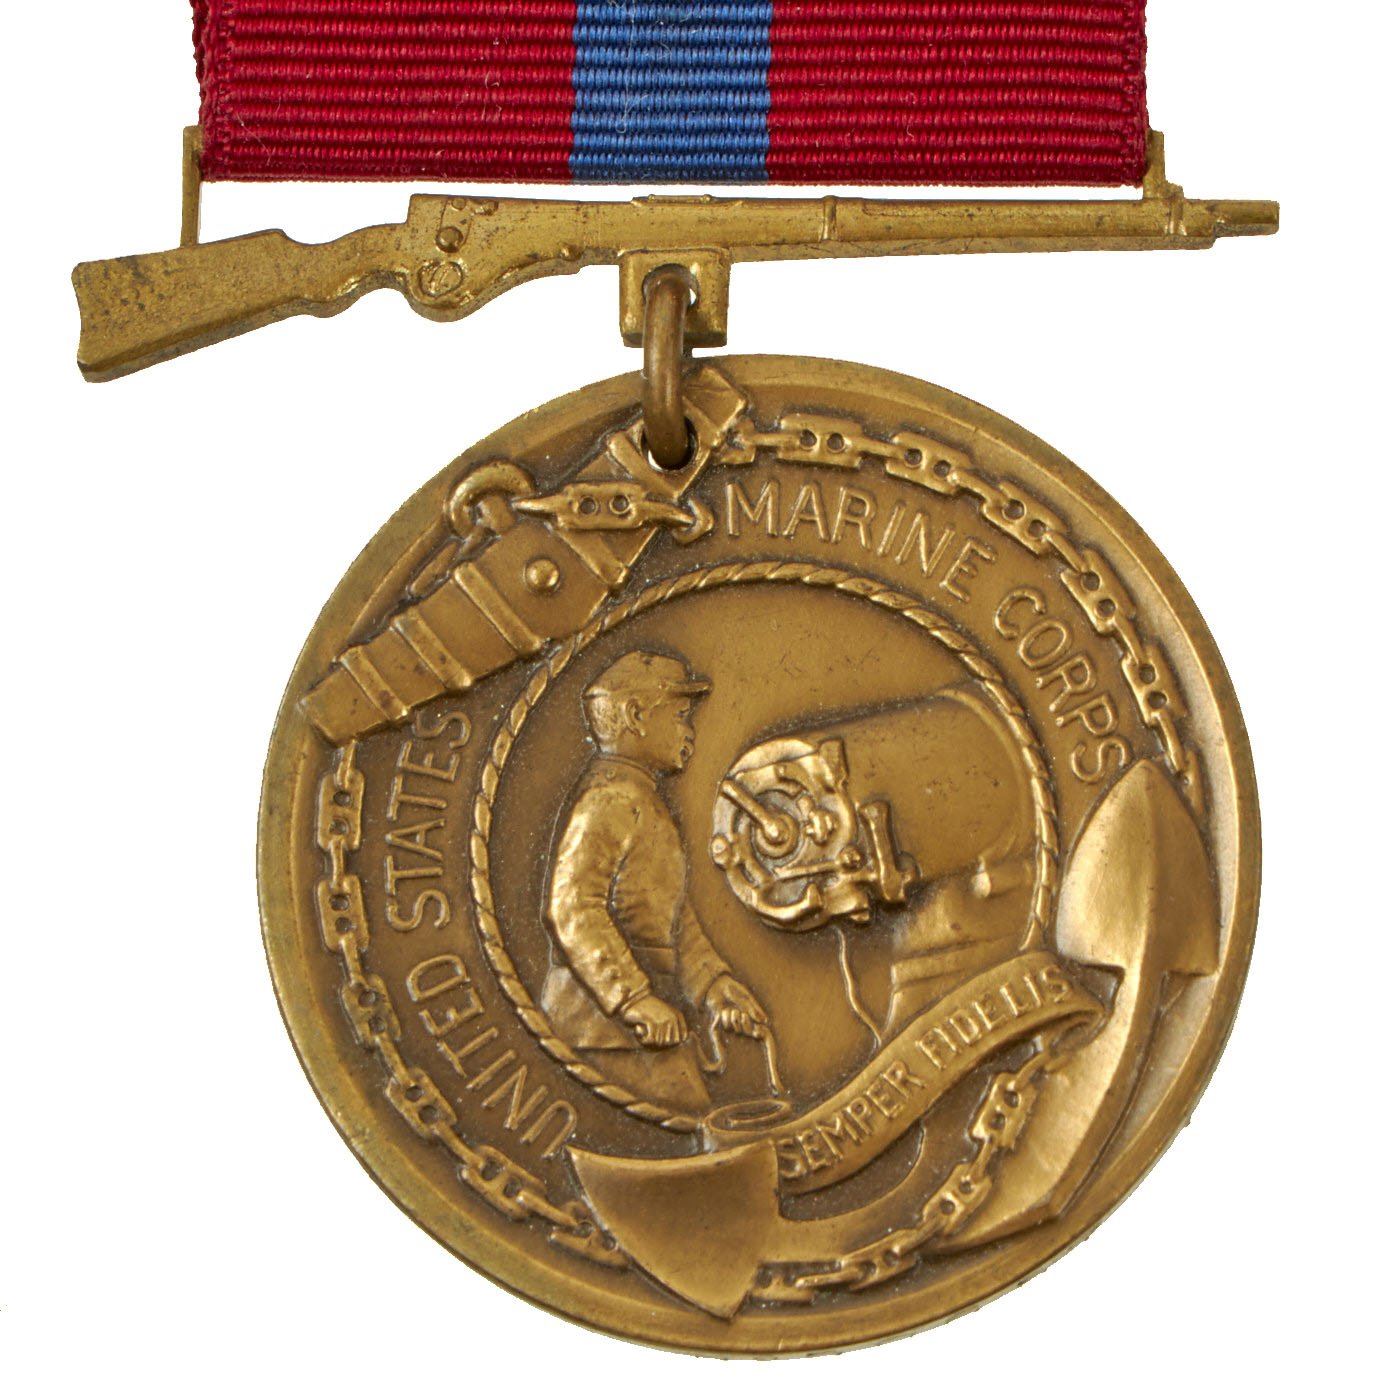 Good Conduct Medal (United States) - Wikipedia